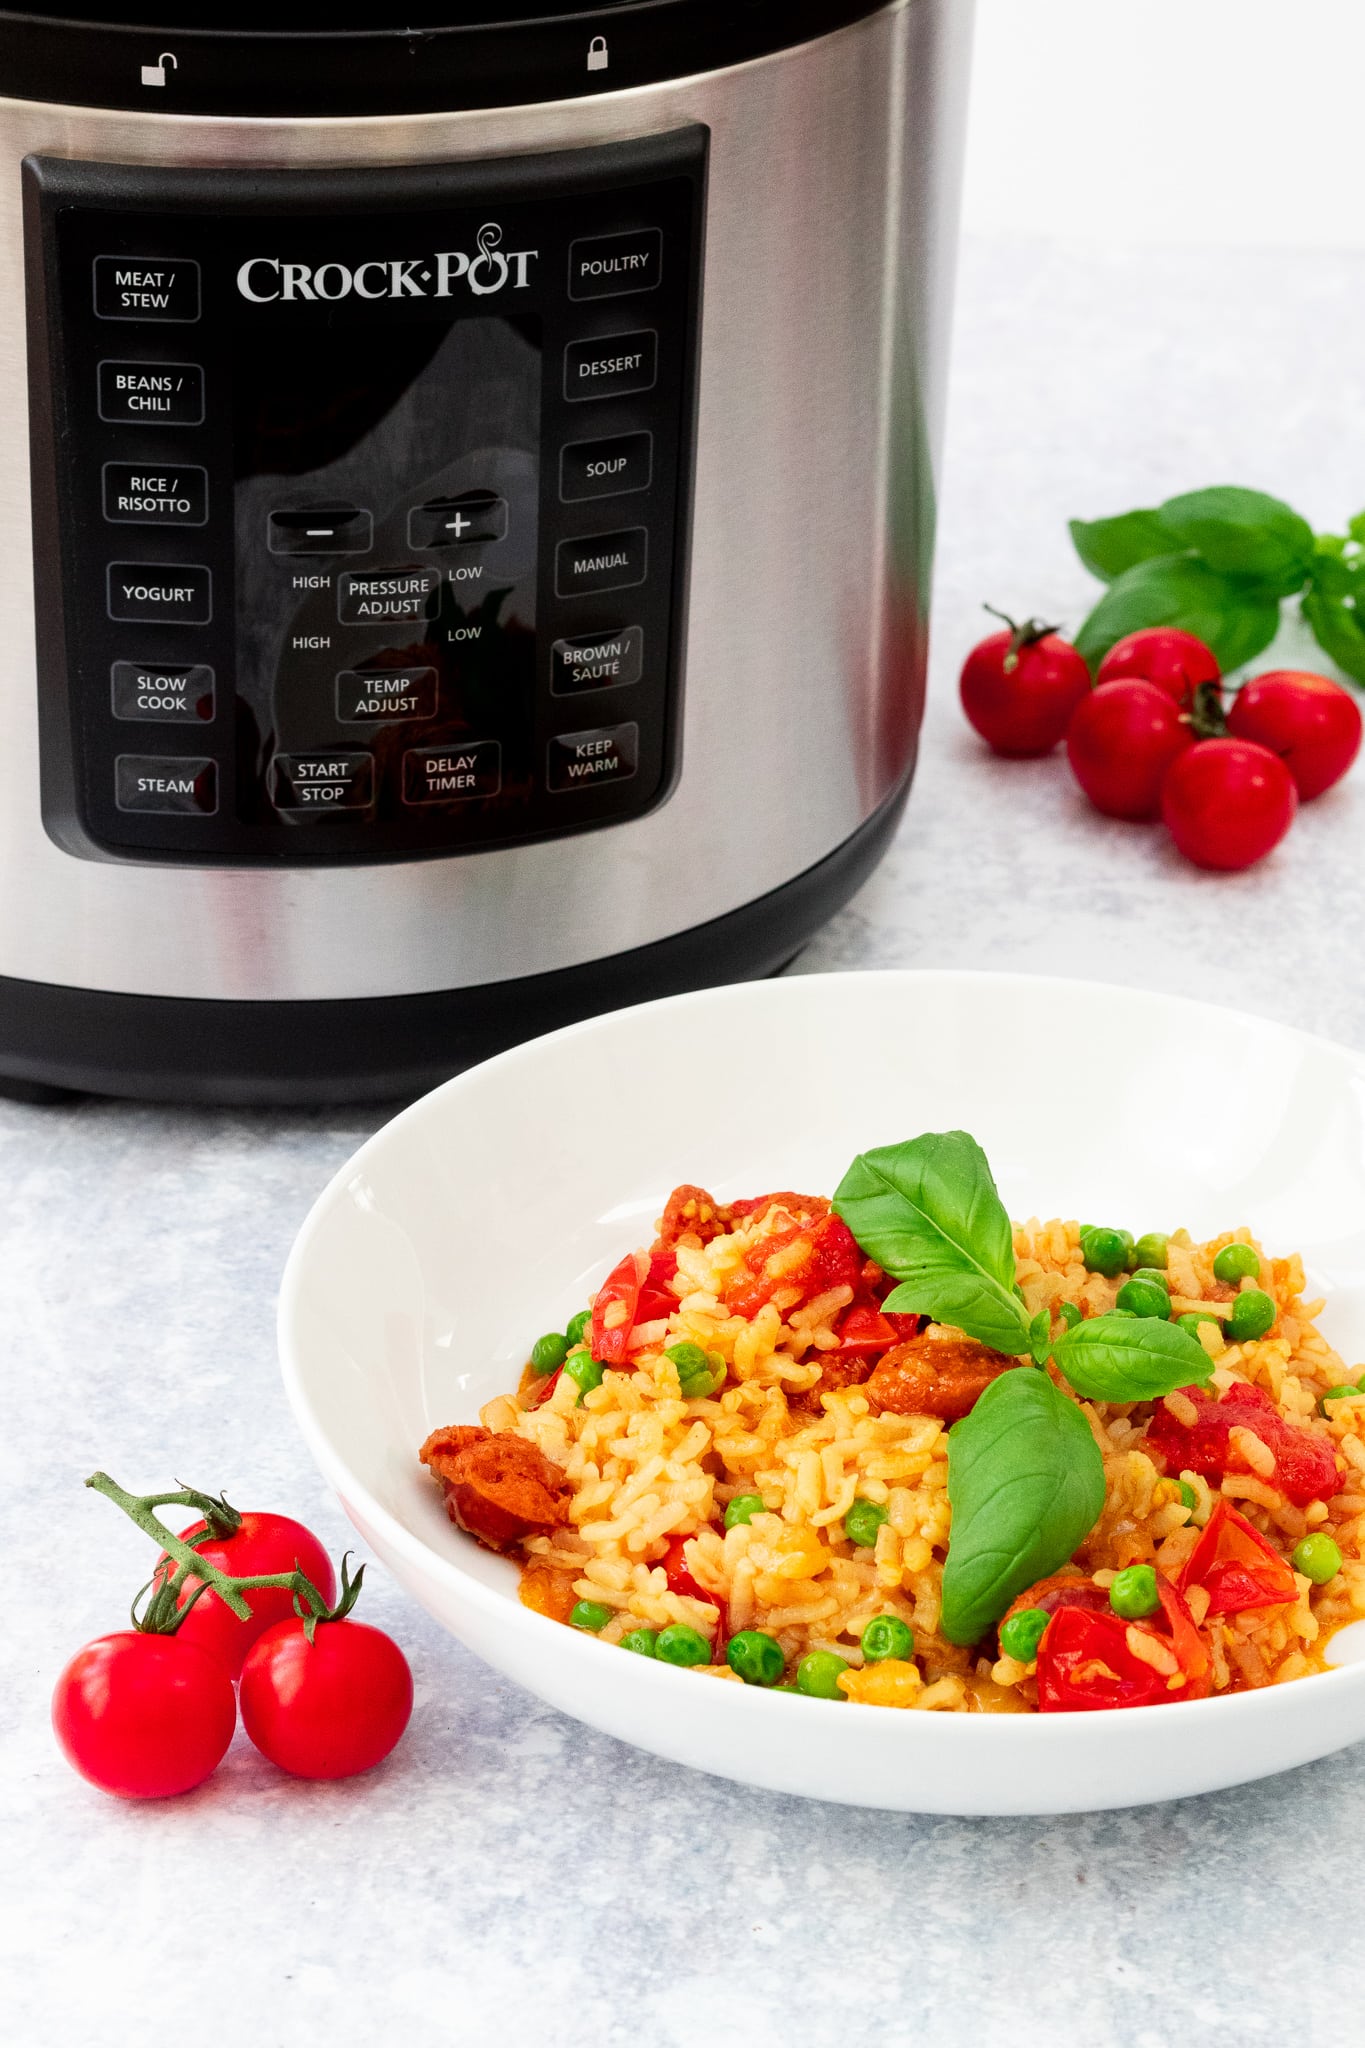 Crock Pot® Express Multi-Cooker with Chorizo risotto